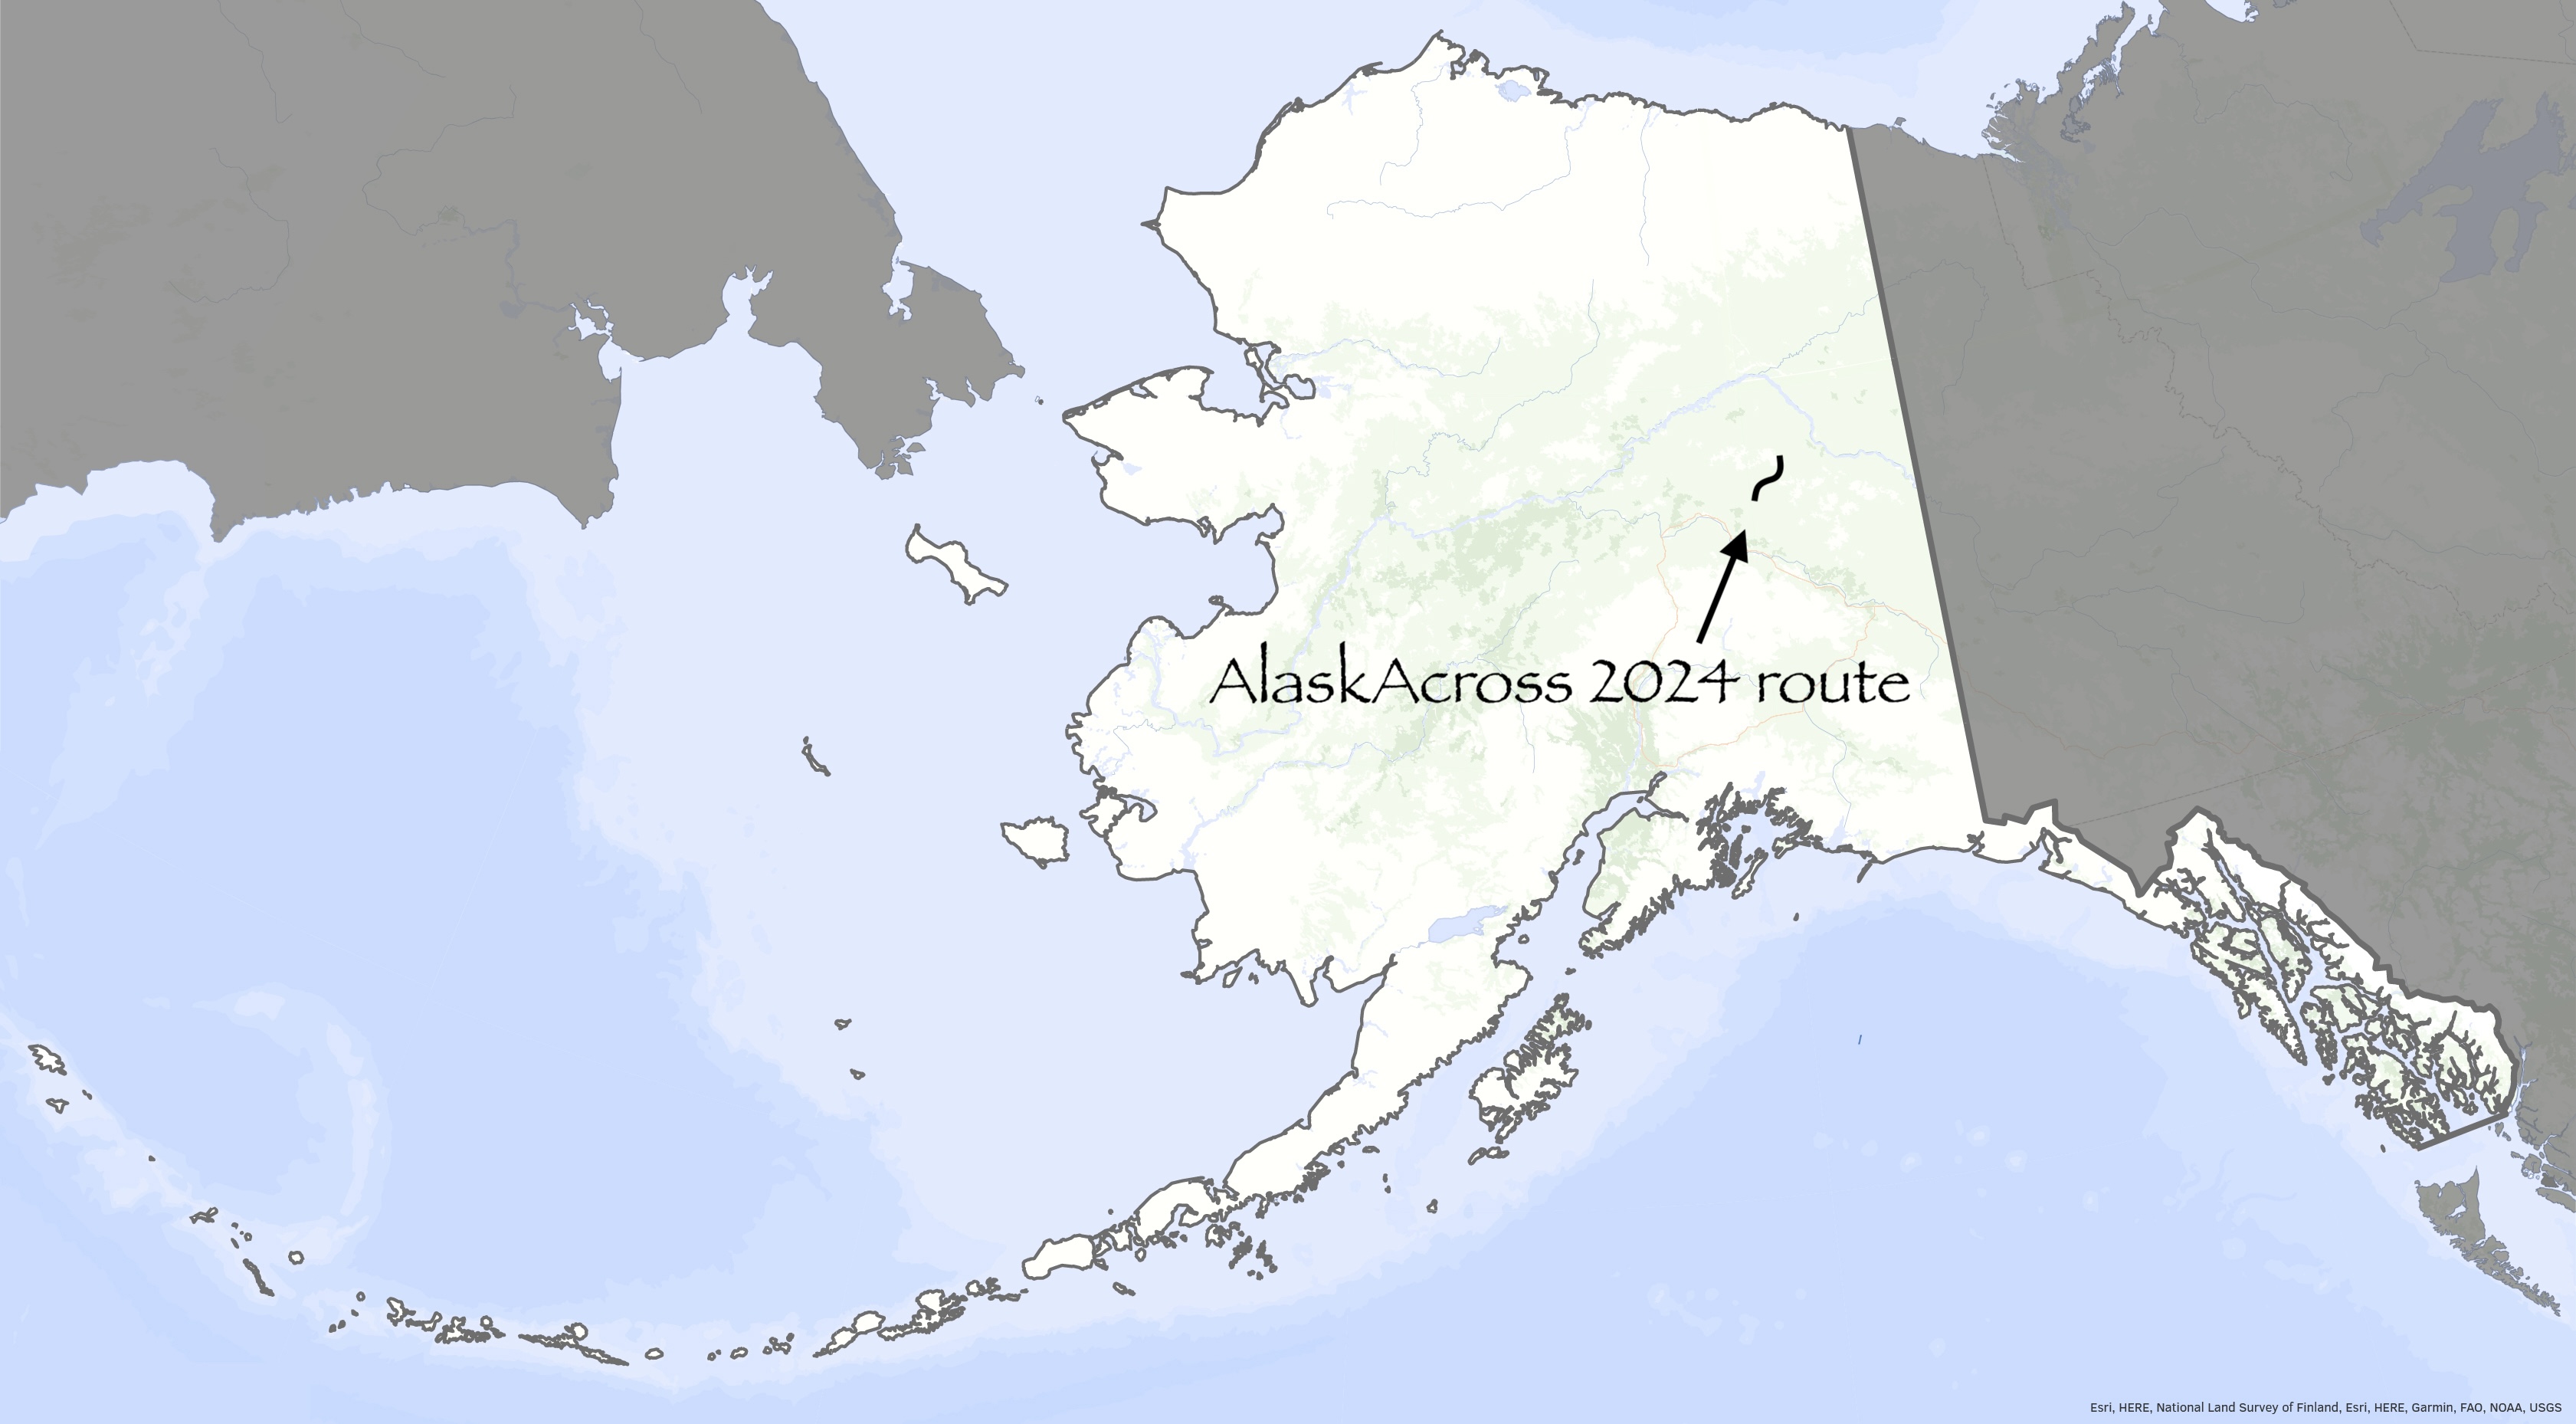 A map of Alaska features a line showing the approximate route of the AlaskAcross 2024.